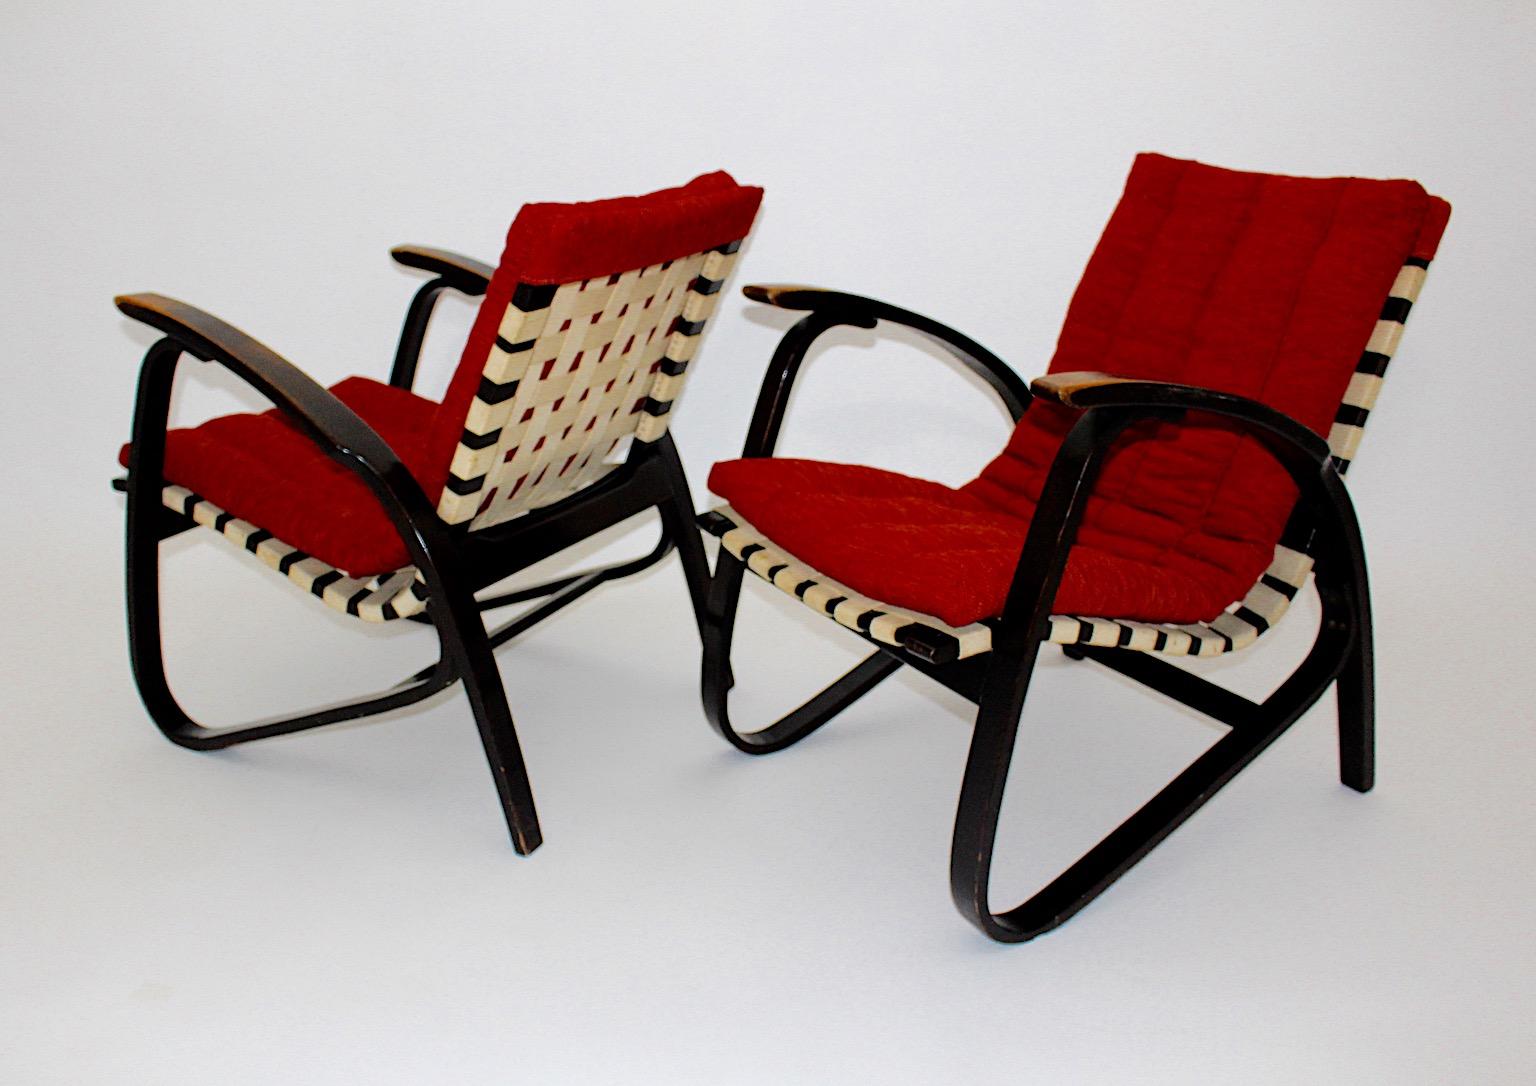 Mid-20th Century Art Deco Vintage Lounge Chairs Red Upholstery Pair Duo Jan Vanek 1940s For Sale